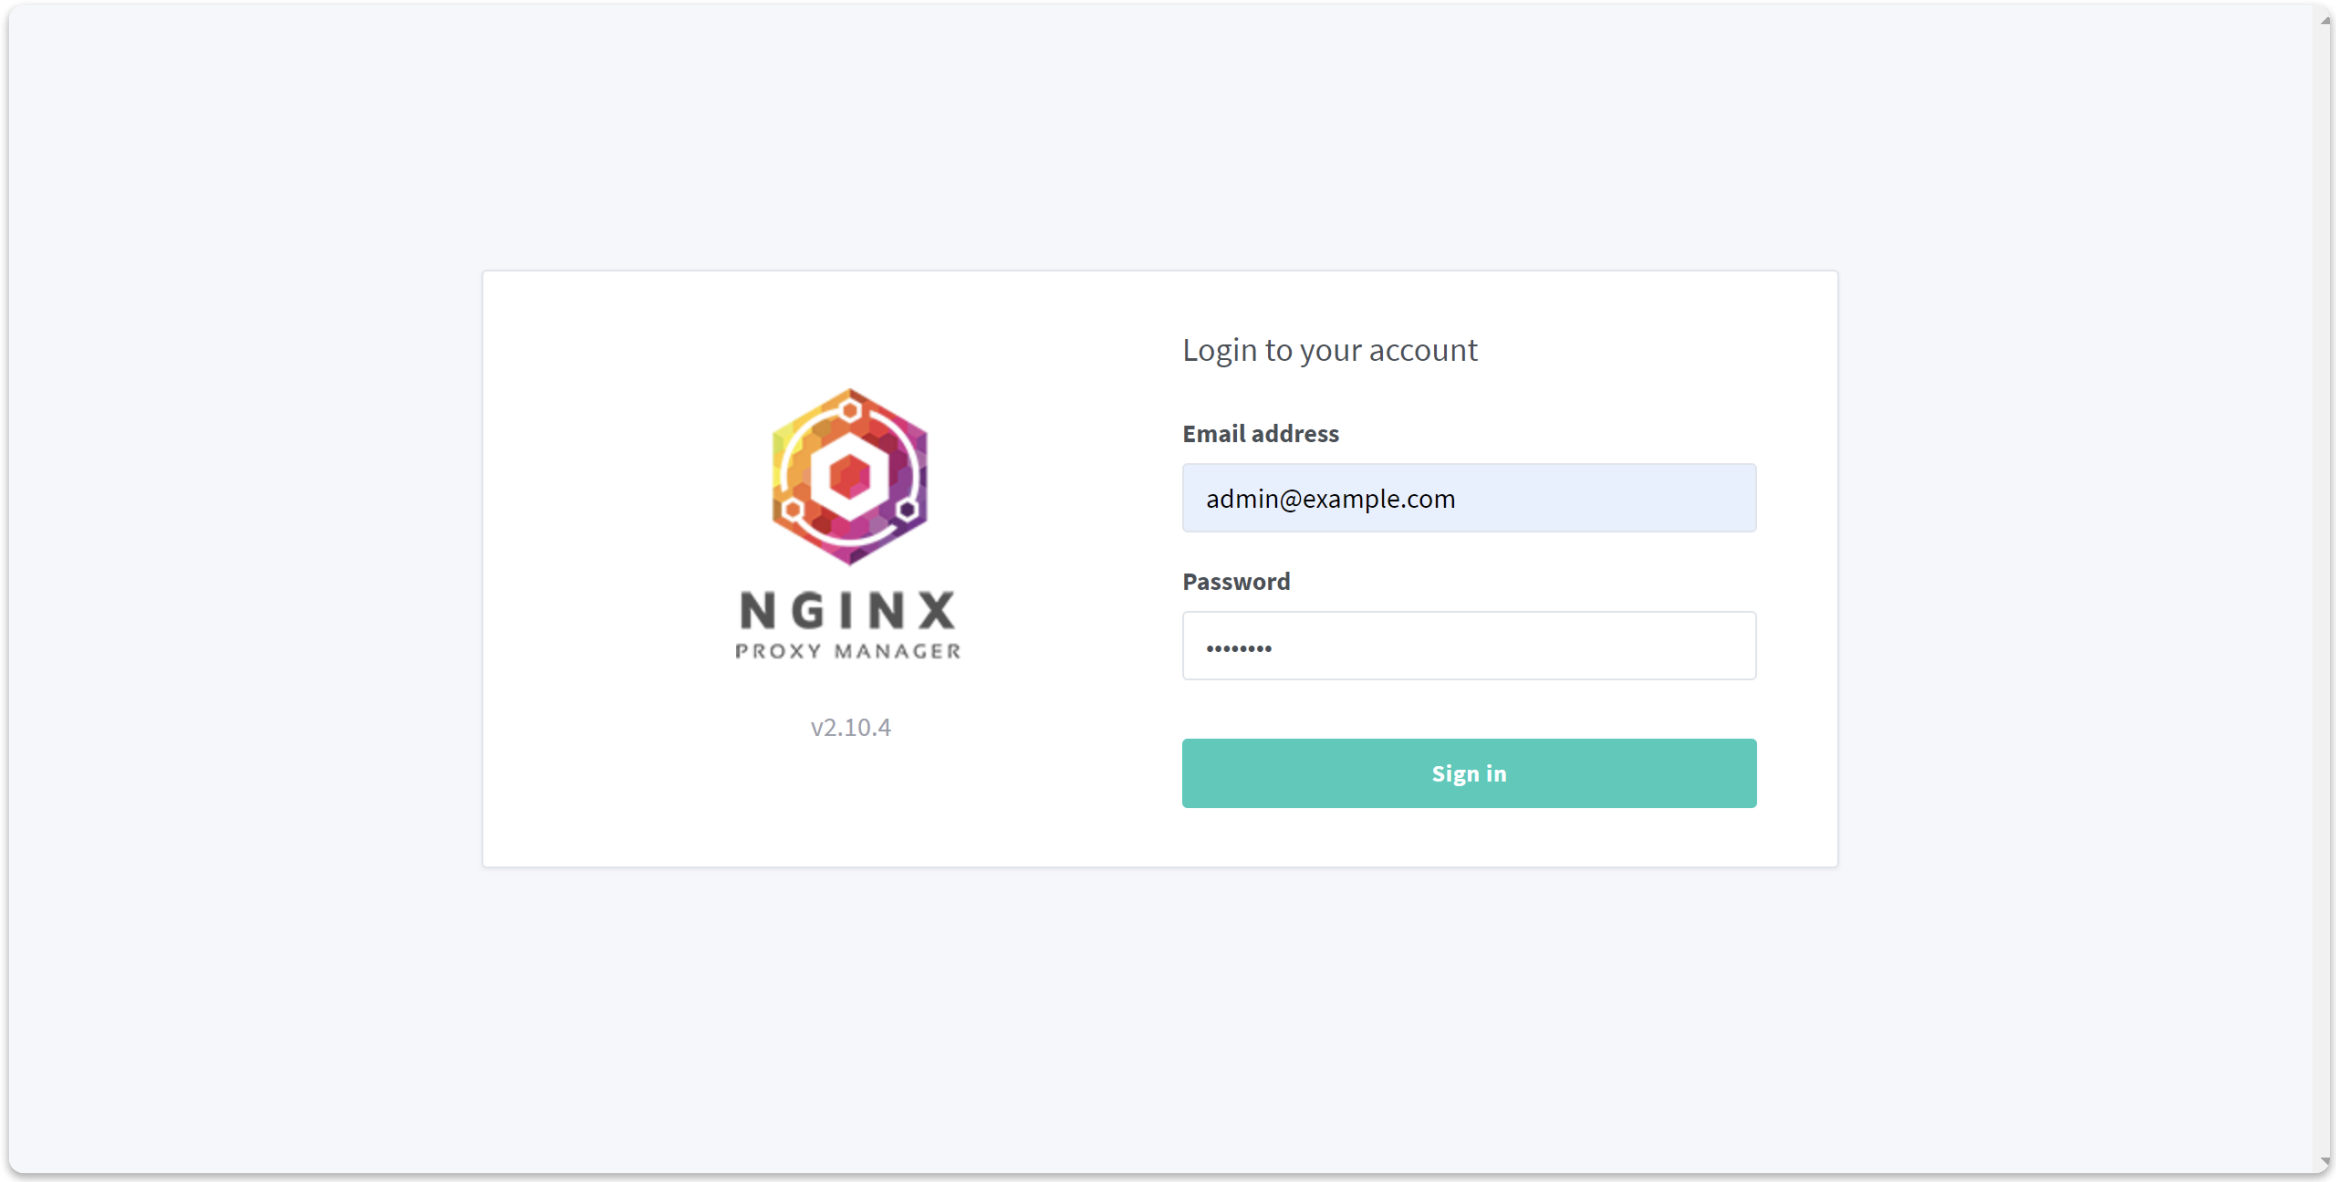 image: Nginx Proxy Manager - Login to your account